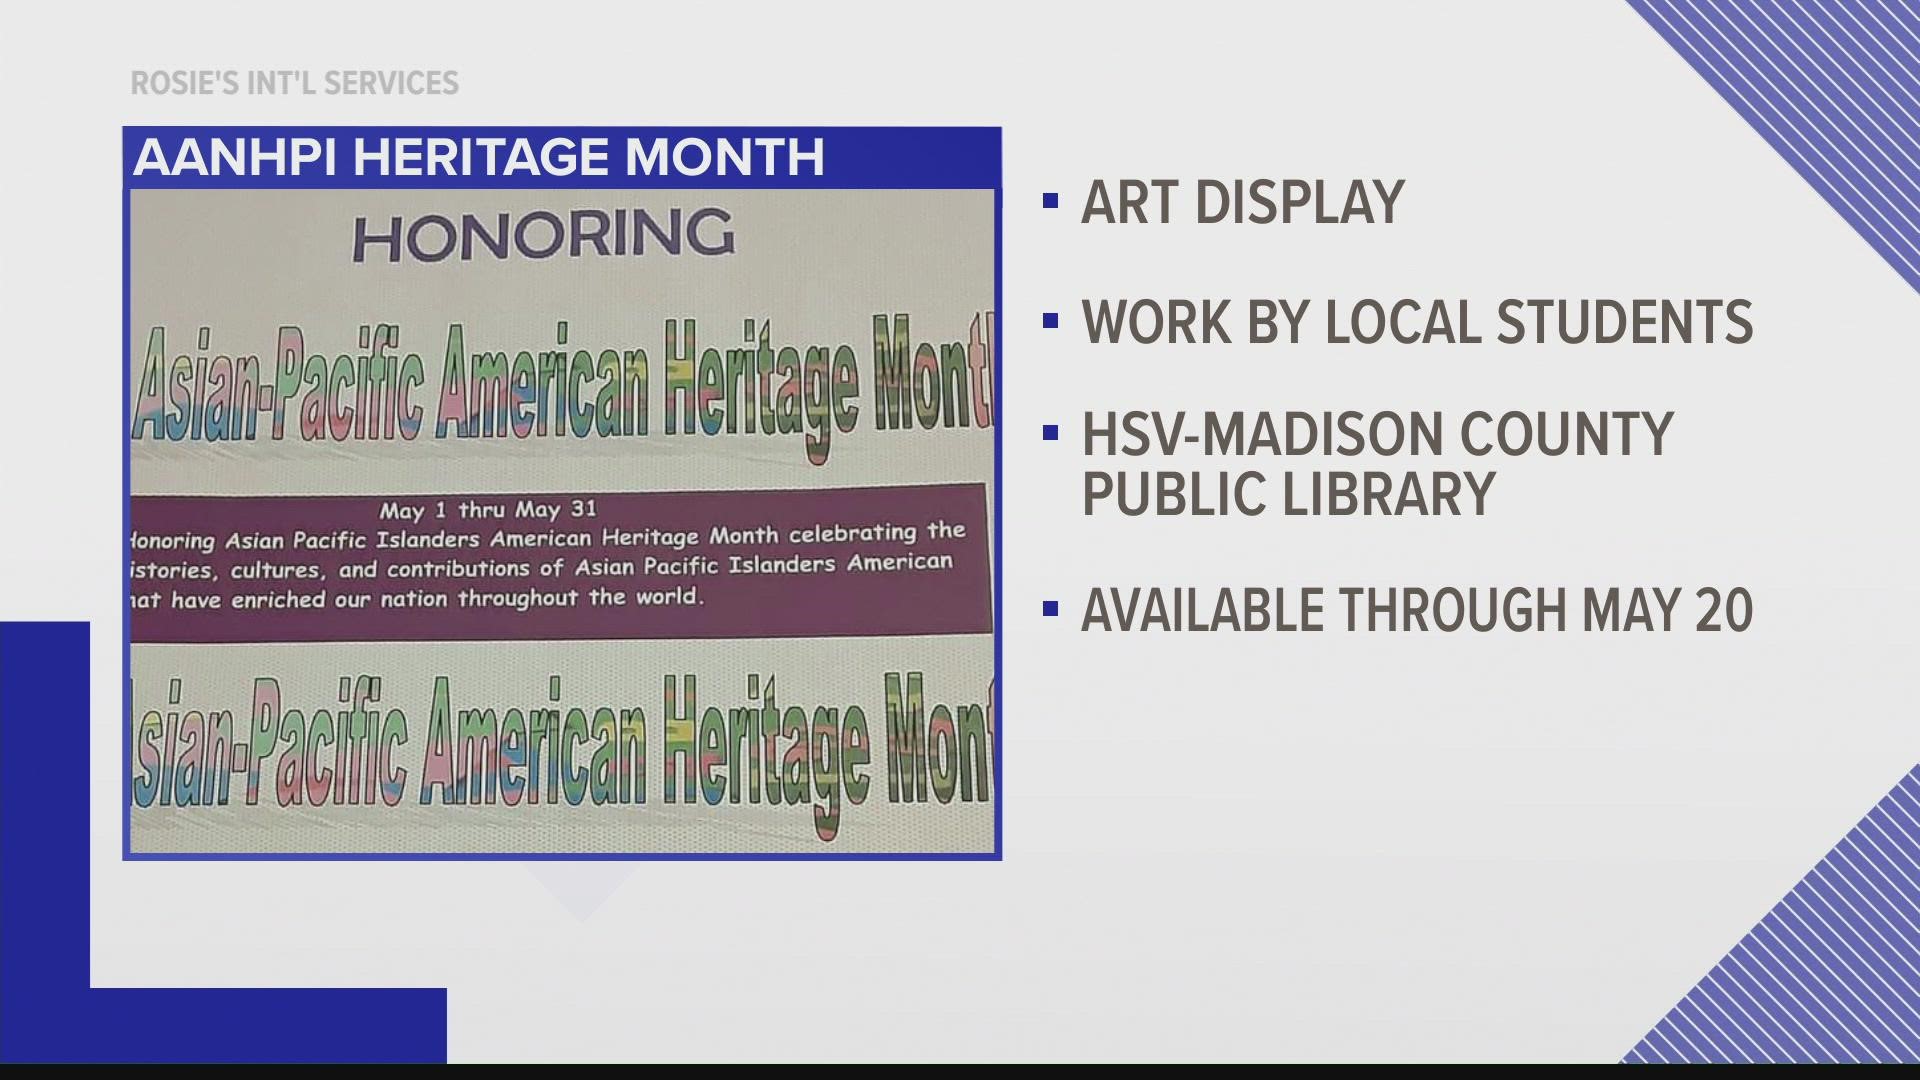 Local artwork display in honor of Asian American and Pacific Islander Heritage Month.